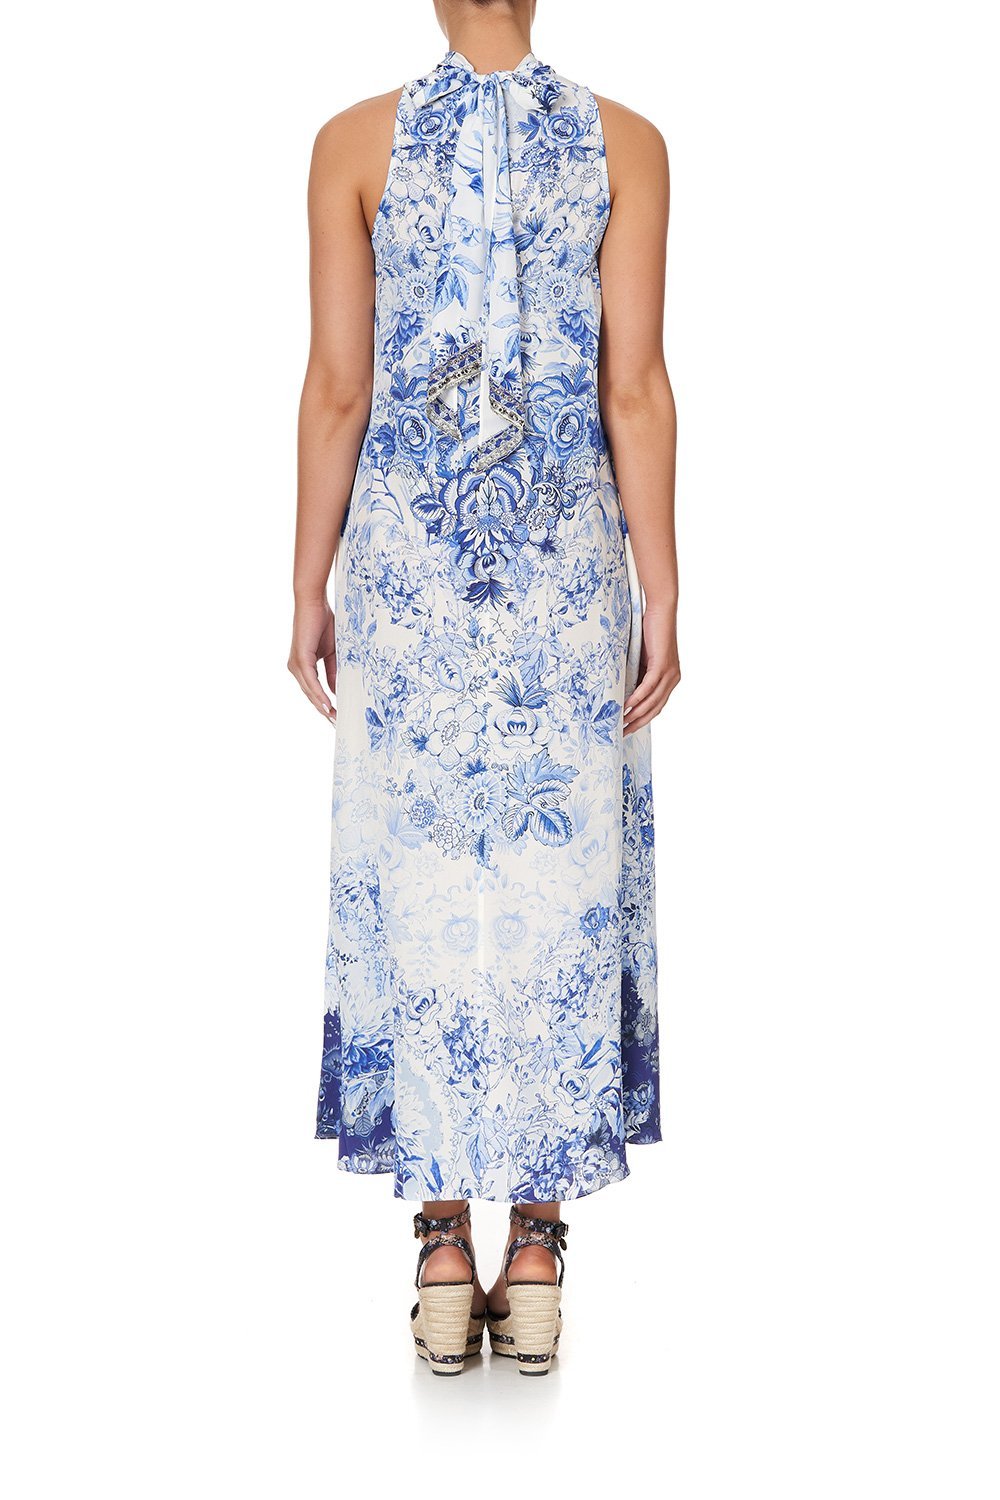 HIGH NECK DRESS WITH BACK NECK TIE HIGH TEA